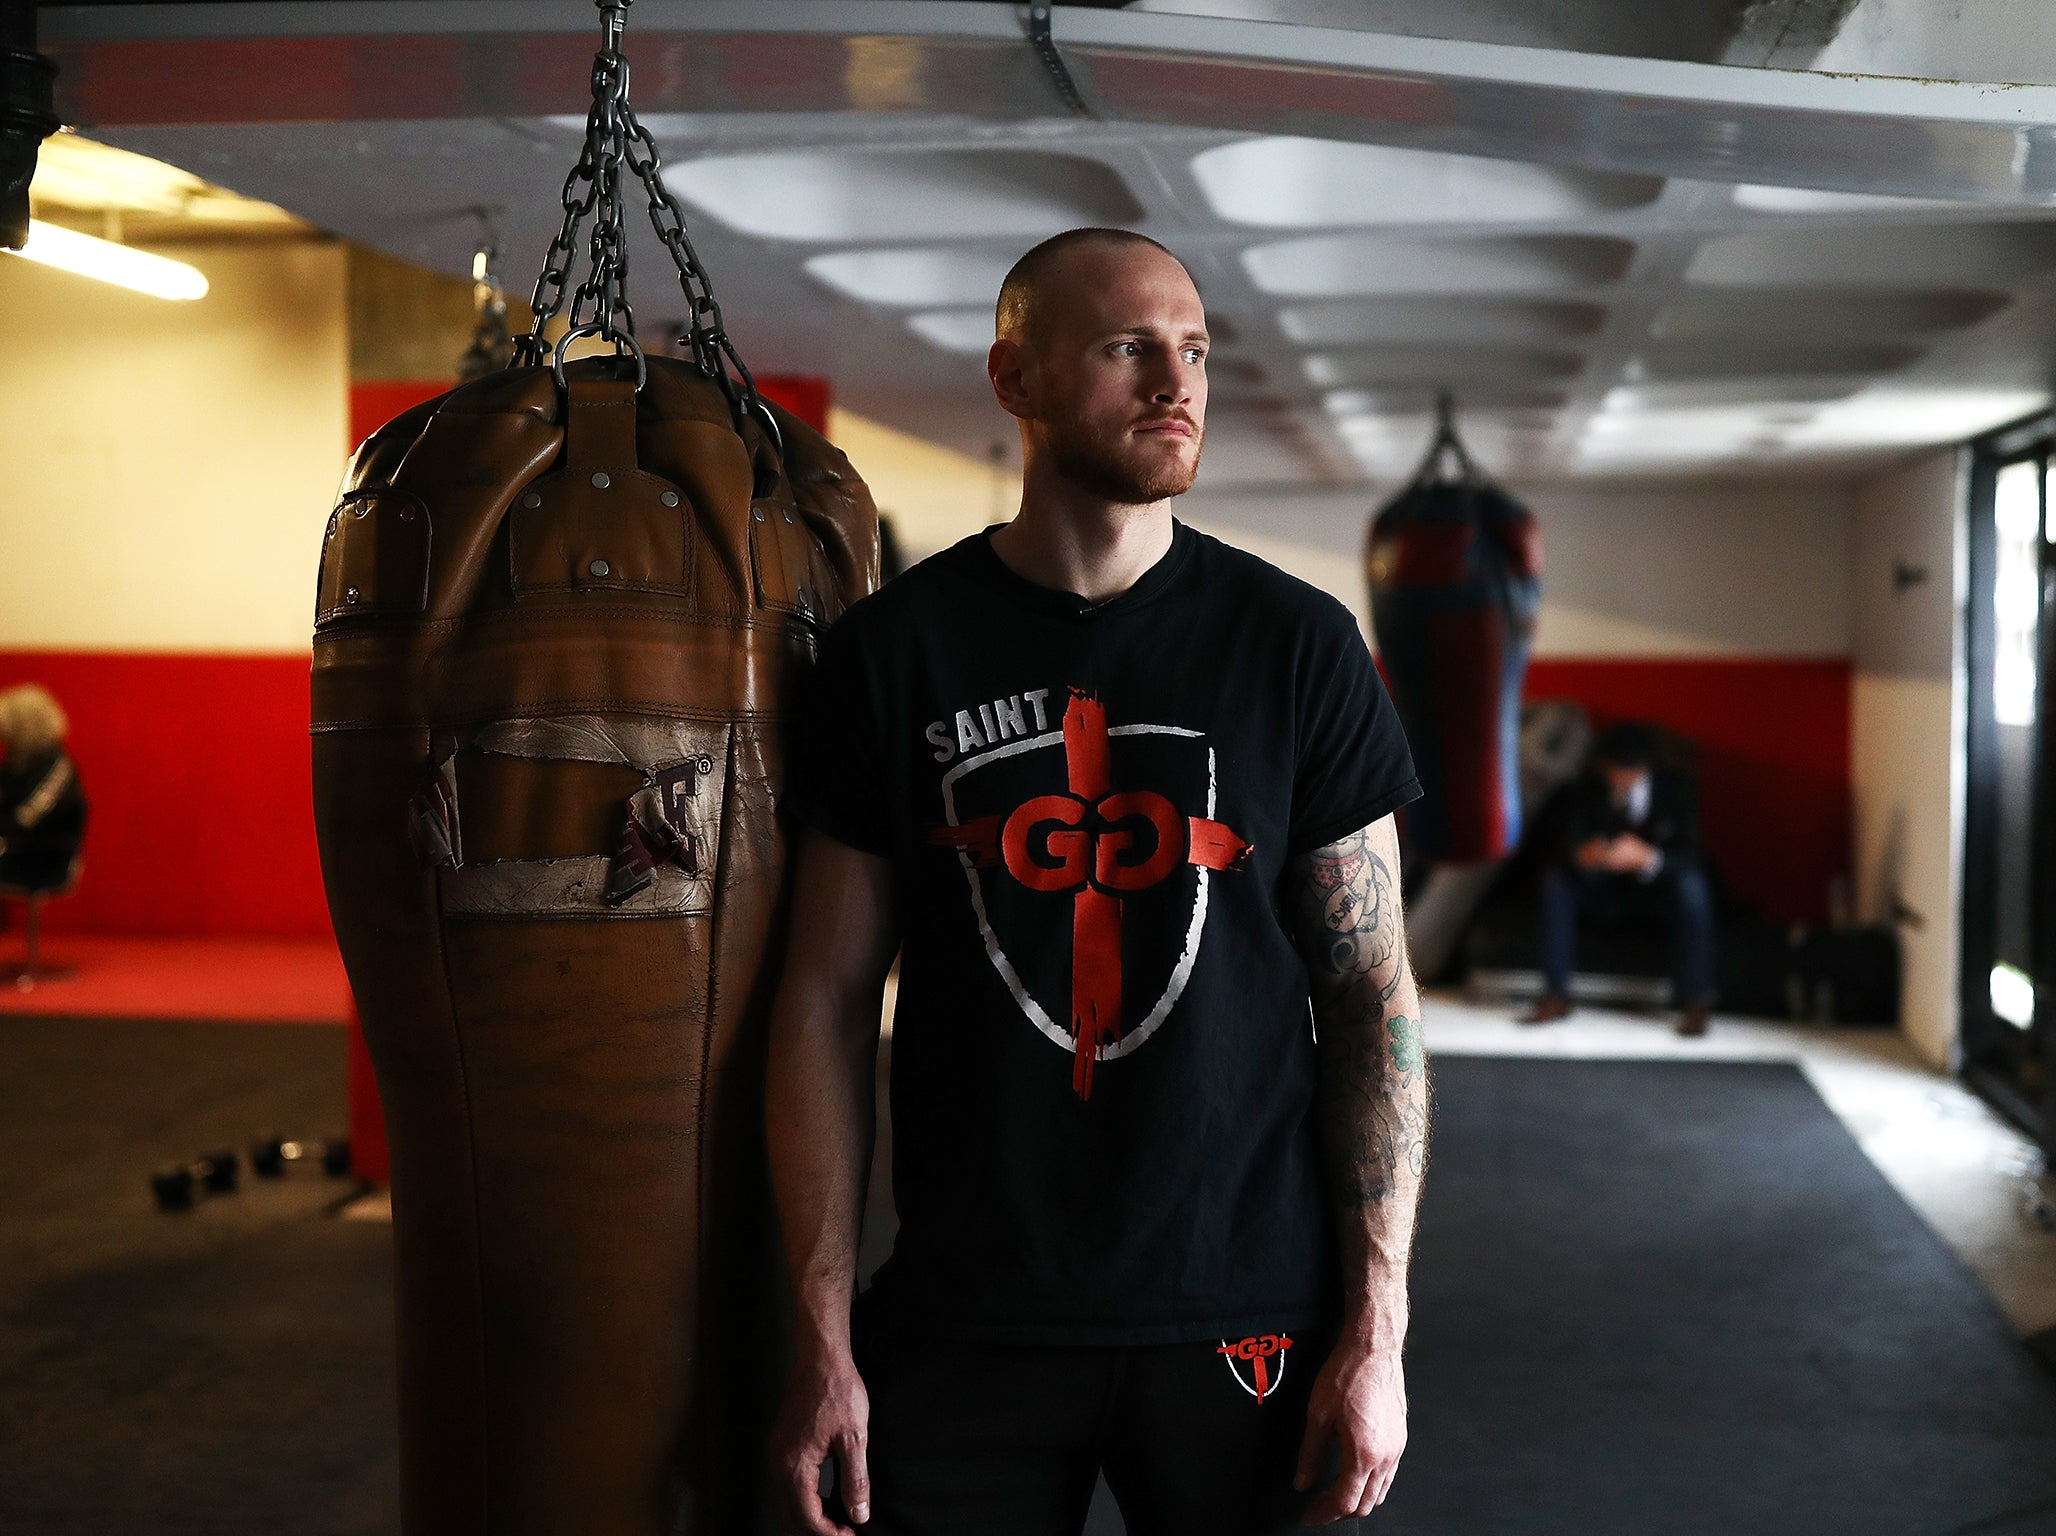 Groves fights in the World Boxing Super Series on Saturday night